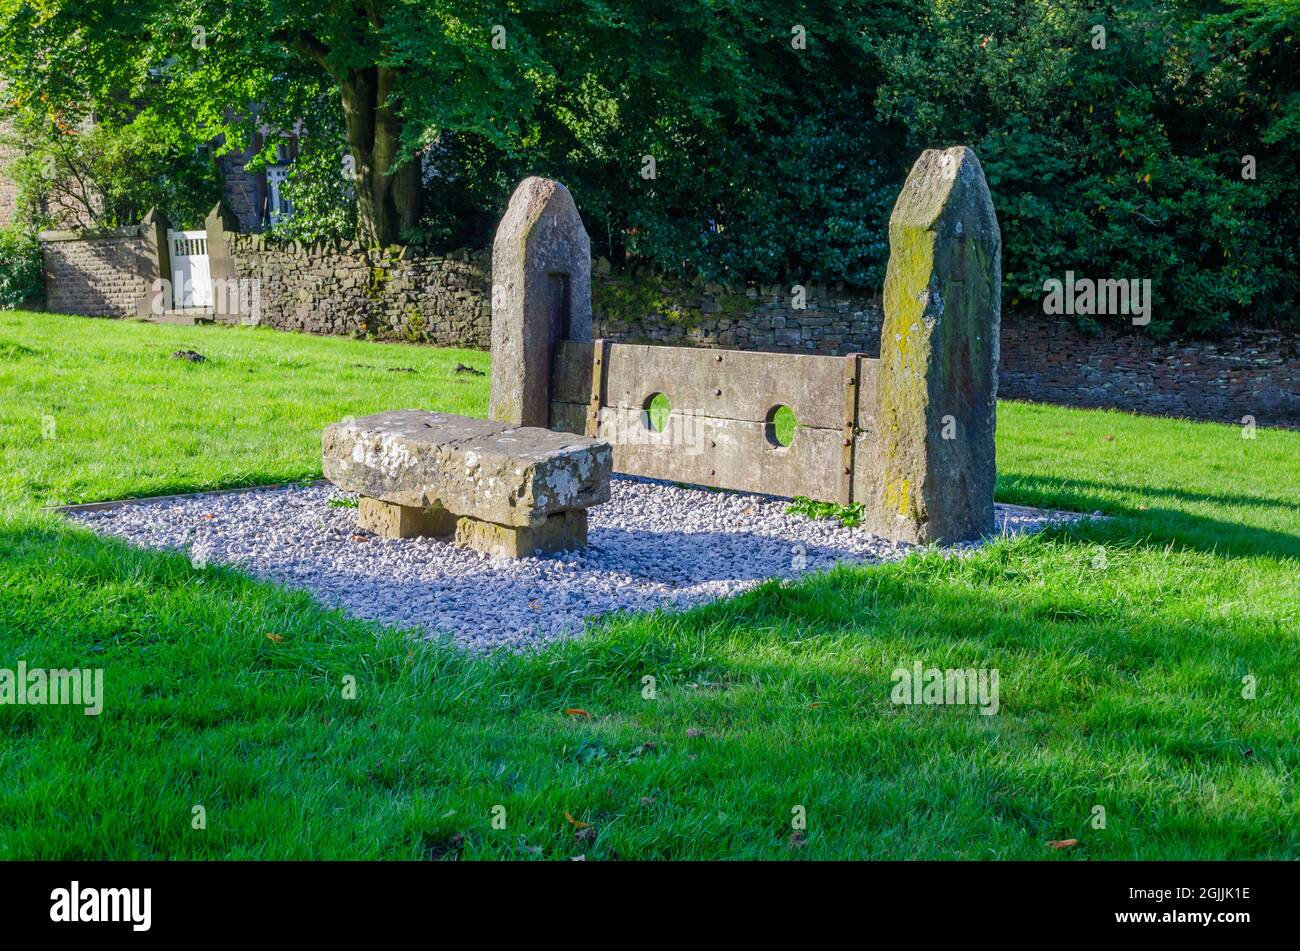 The old stocks at Rivington  village in Lancashire, an antique device for restraining and punishing an individual Stock Photo